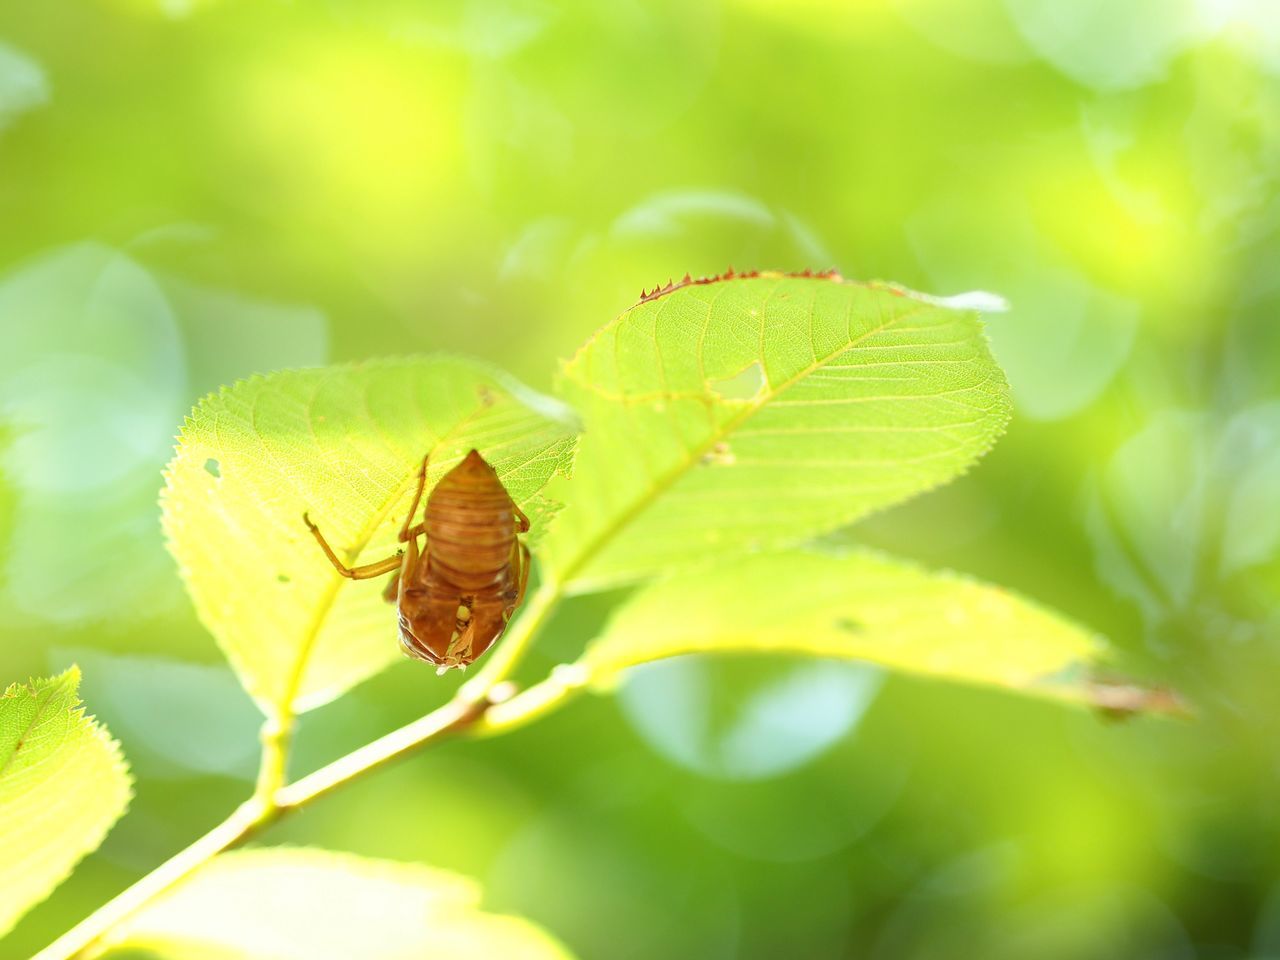 plant part, leaf, invertebrate, insect, animal, animal wildlife, animal themes, close-up, plant, one animal, animals in the wild, green color, day, nature, growth, beauty in nature, selective focus, no people, sunlight, outdoors, butterfly - insect